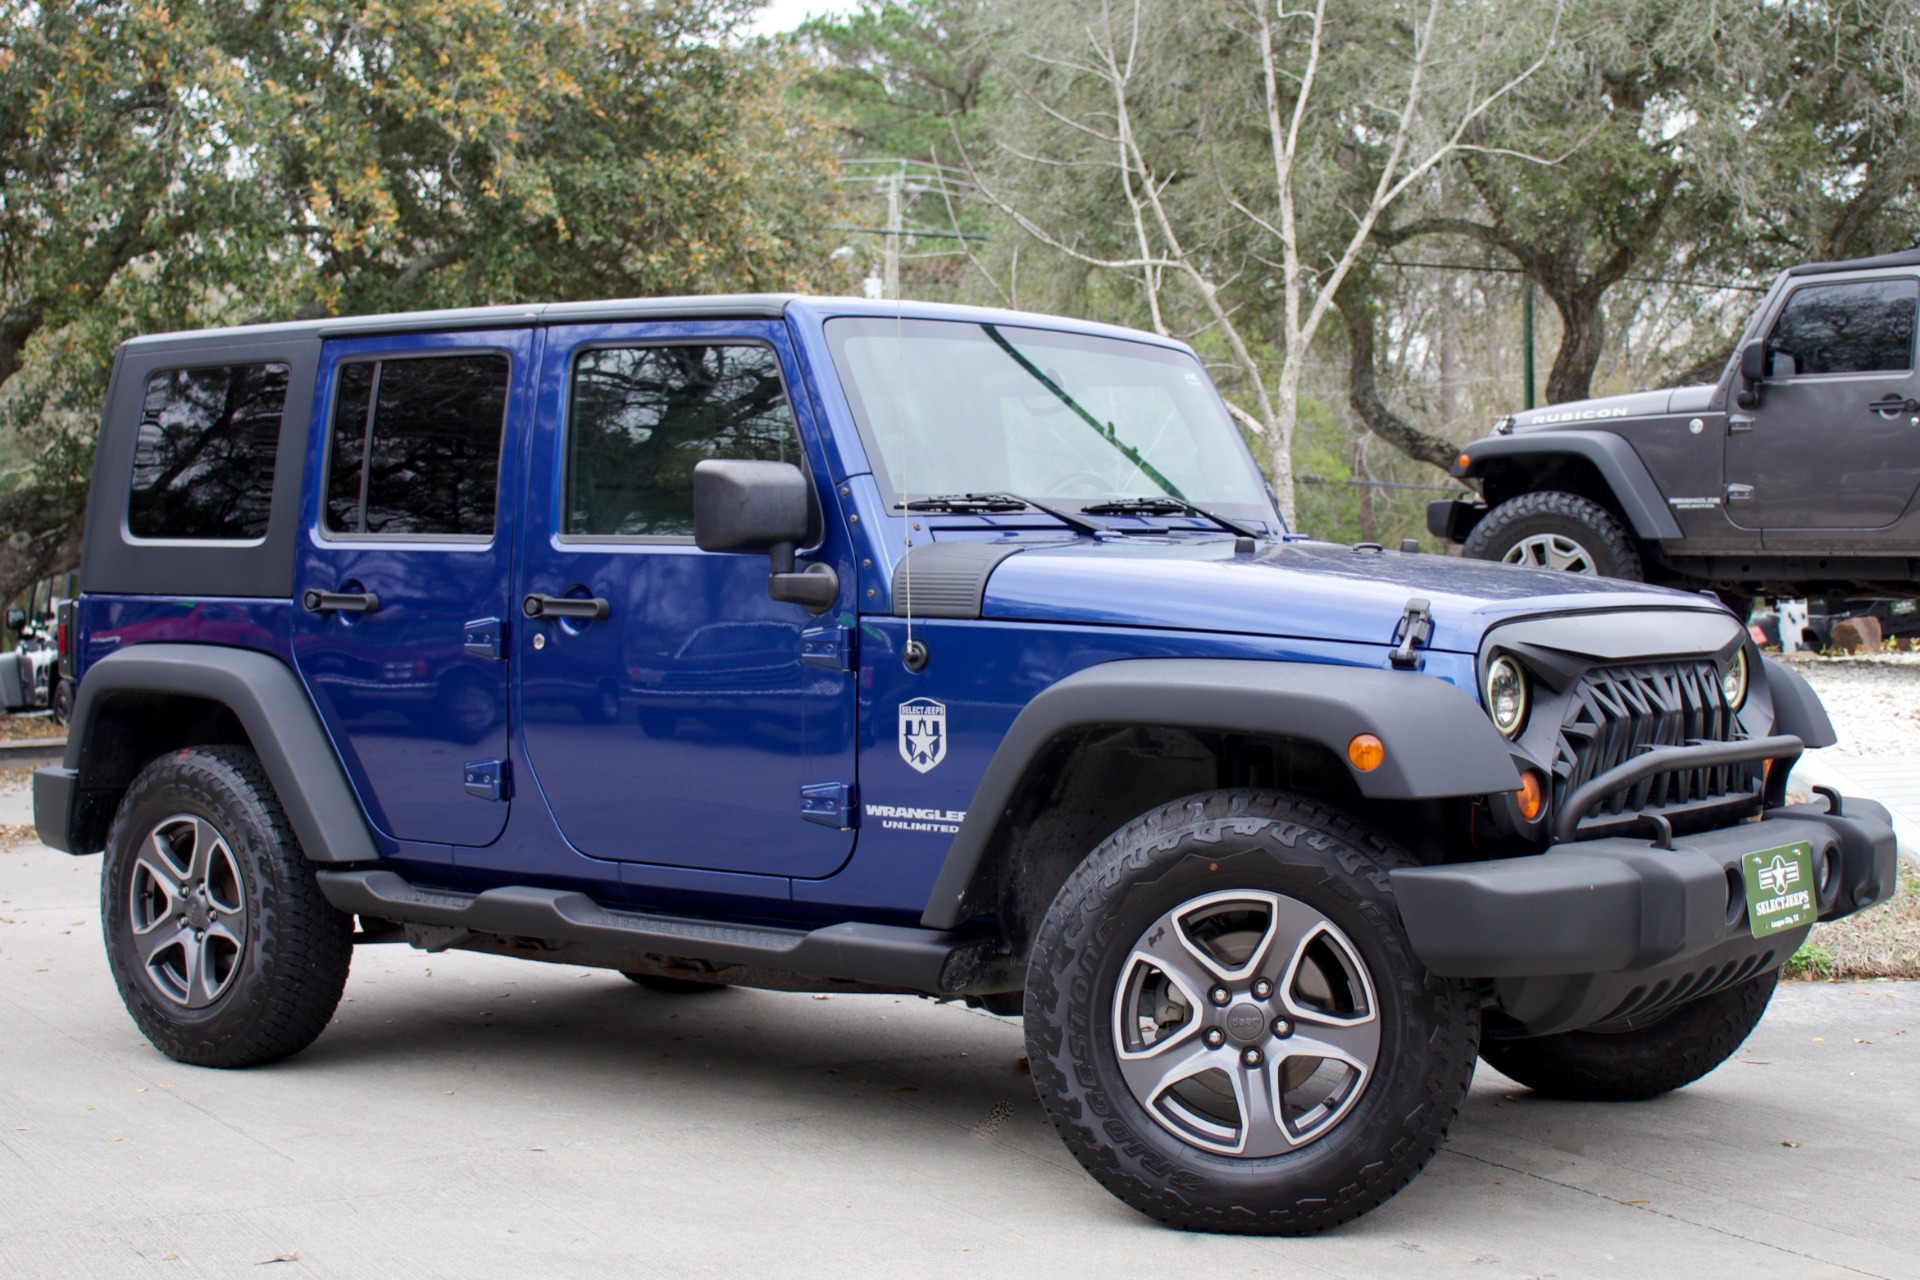 Used 2009 Jeep Wrangler Unlimited X For Sale ($21,995) | Select Jeeps Inc.  Stock #778813